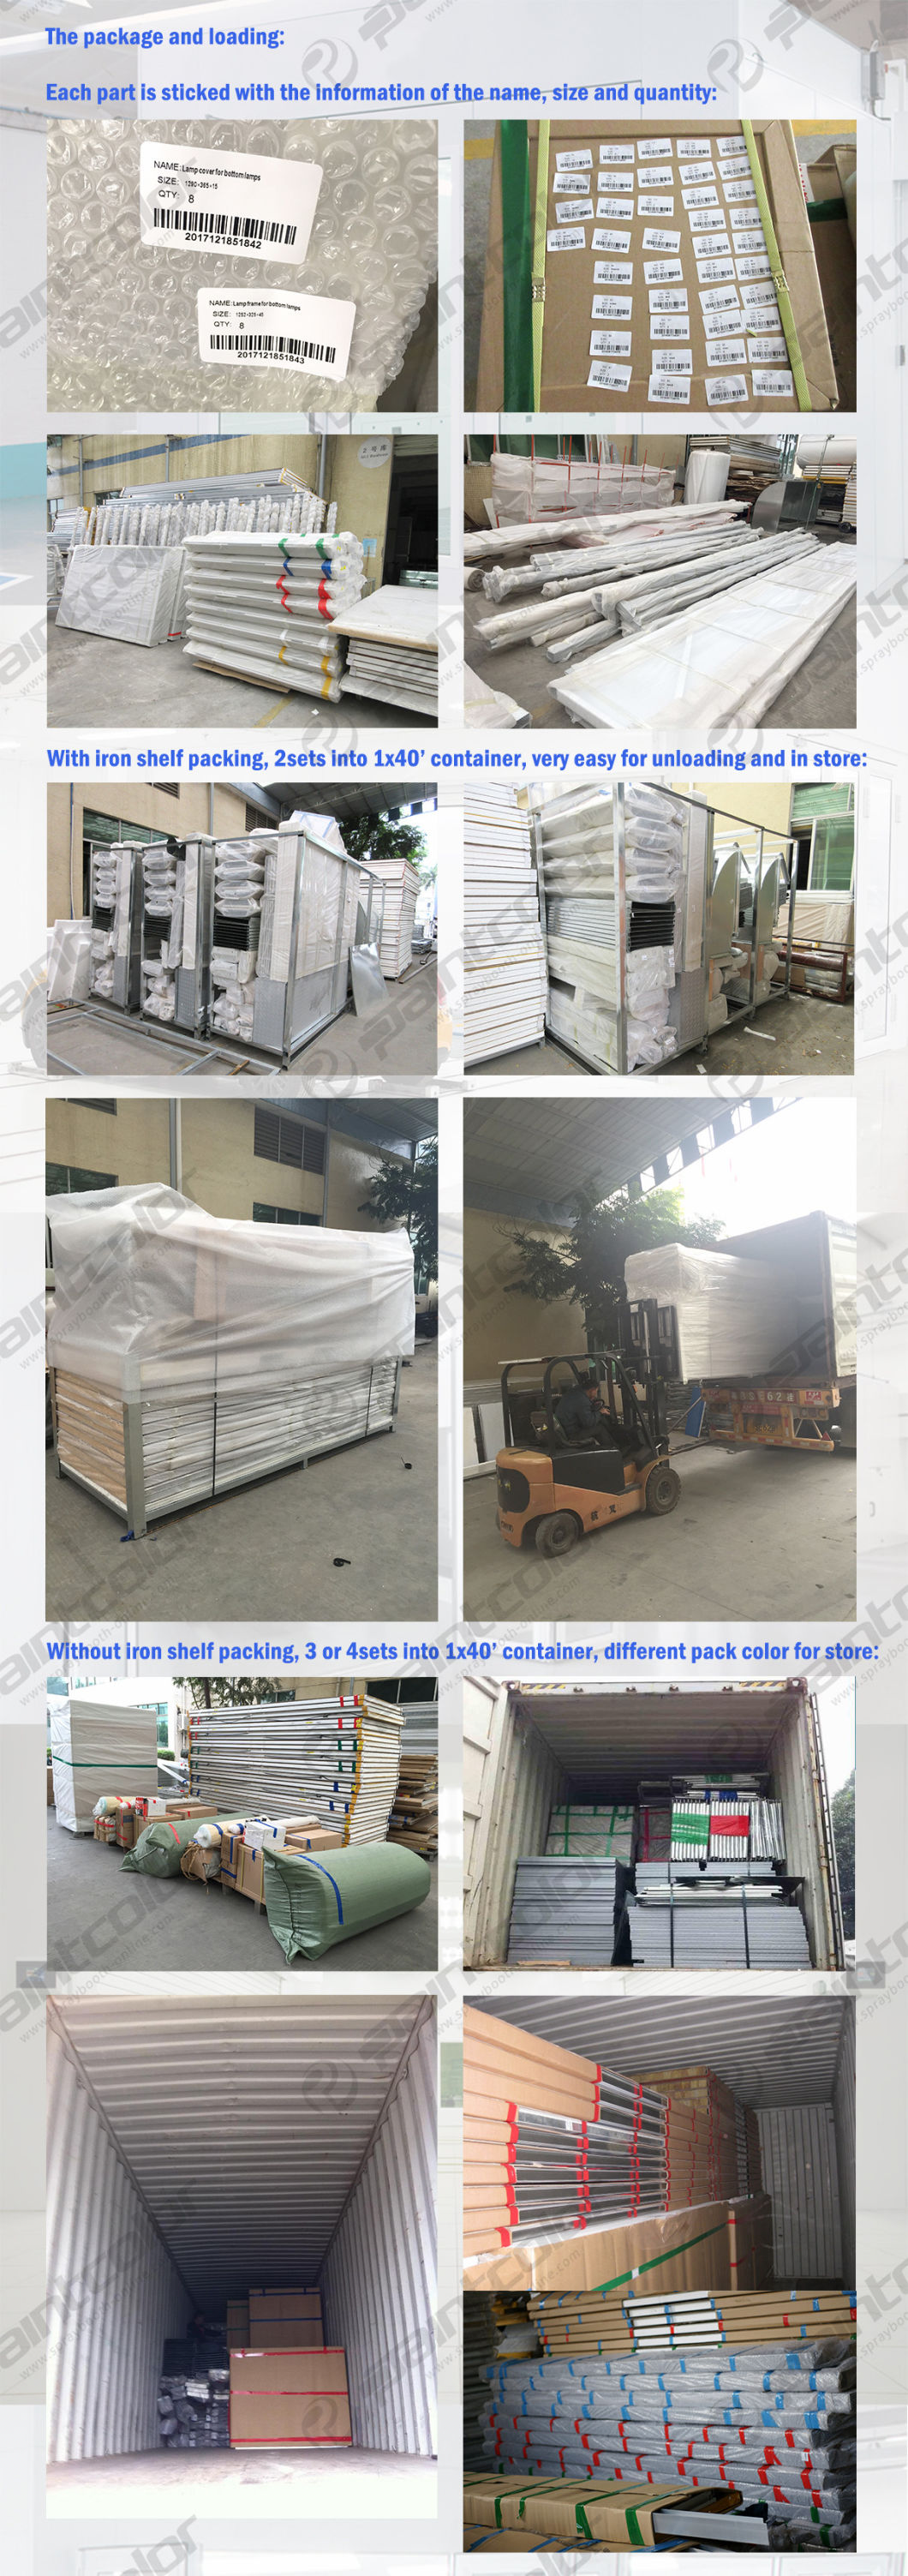 Sheet Metal Line Customized Auto Painting Line Ce Models Combined Paint Oven with Preparation Bays Paintcolor Brand